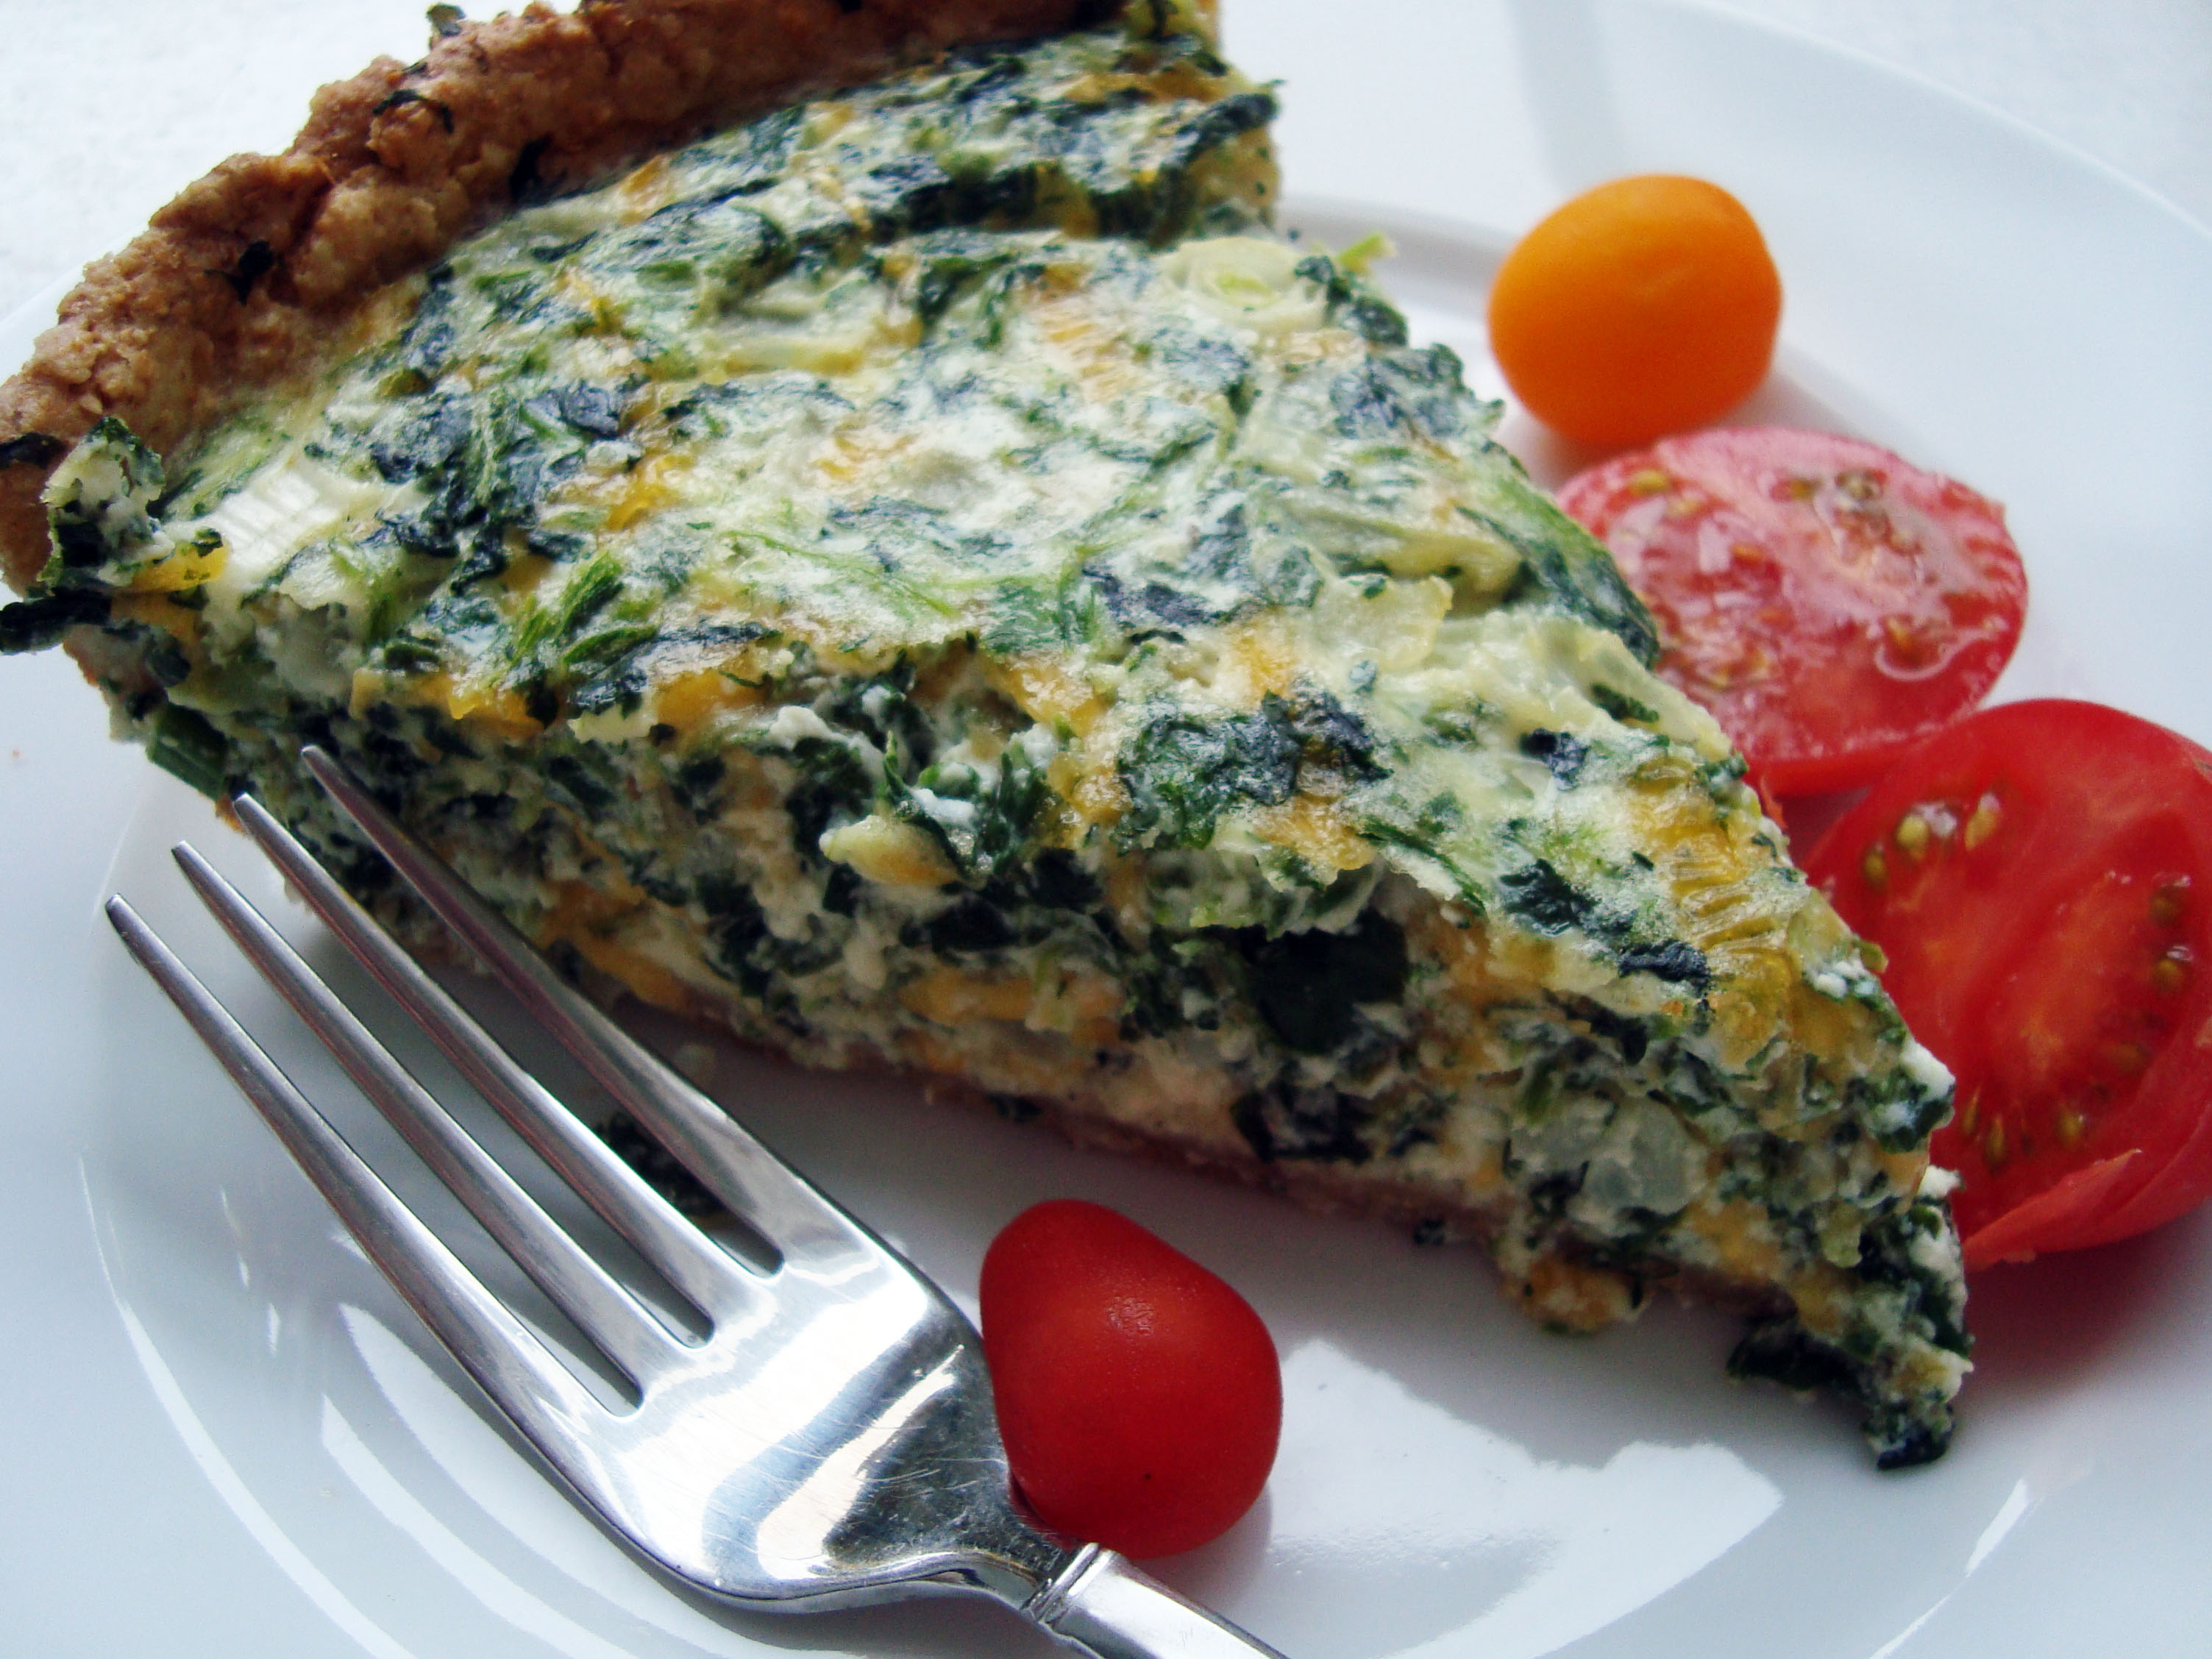 How Many Calories In A Slice Of Spinach Quiche